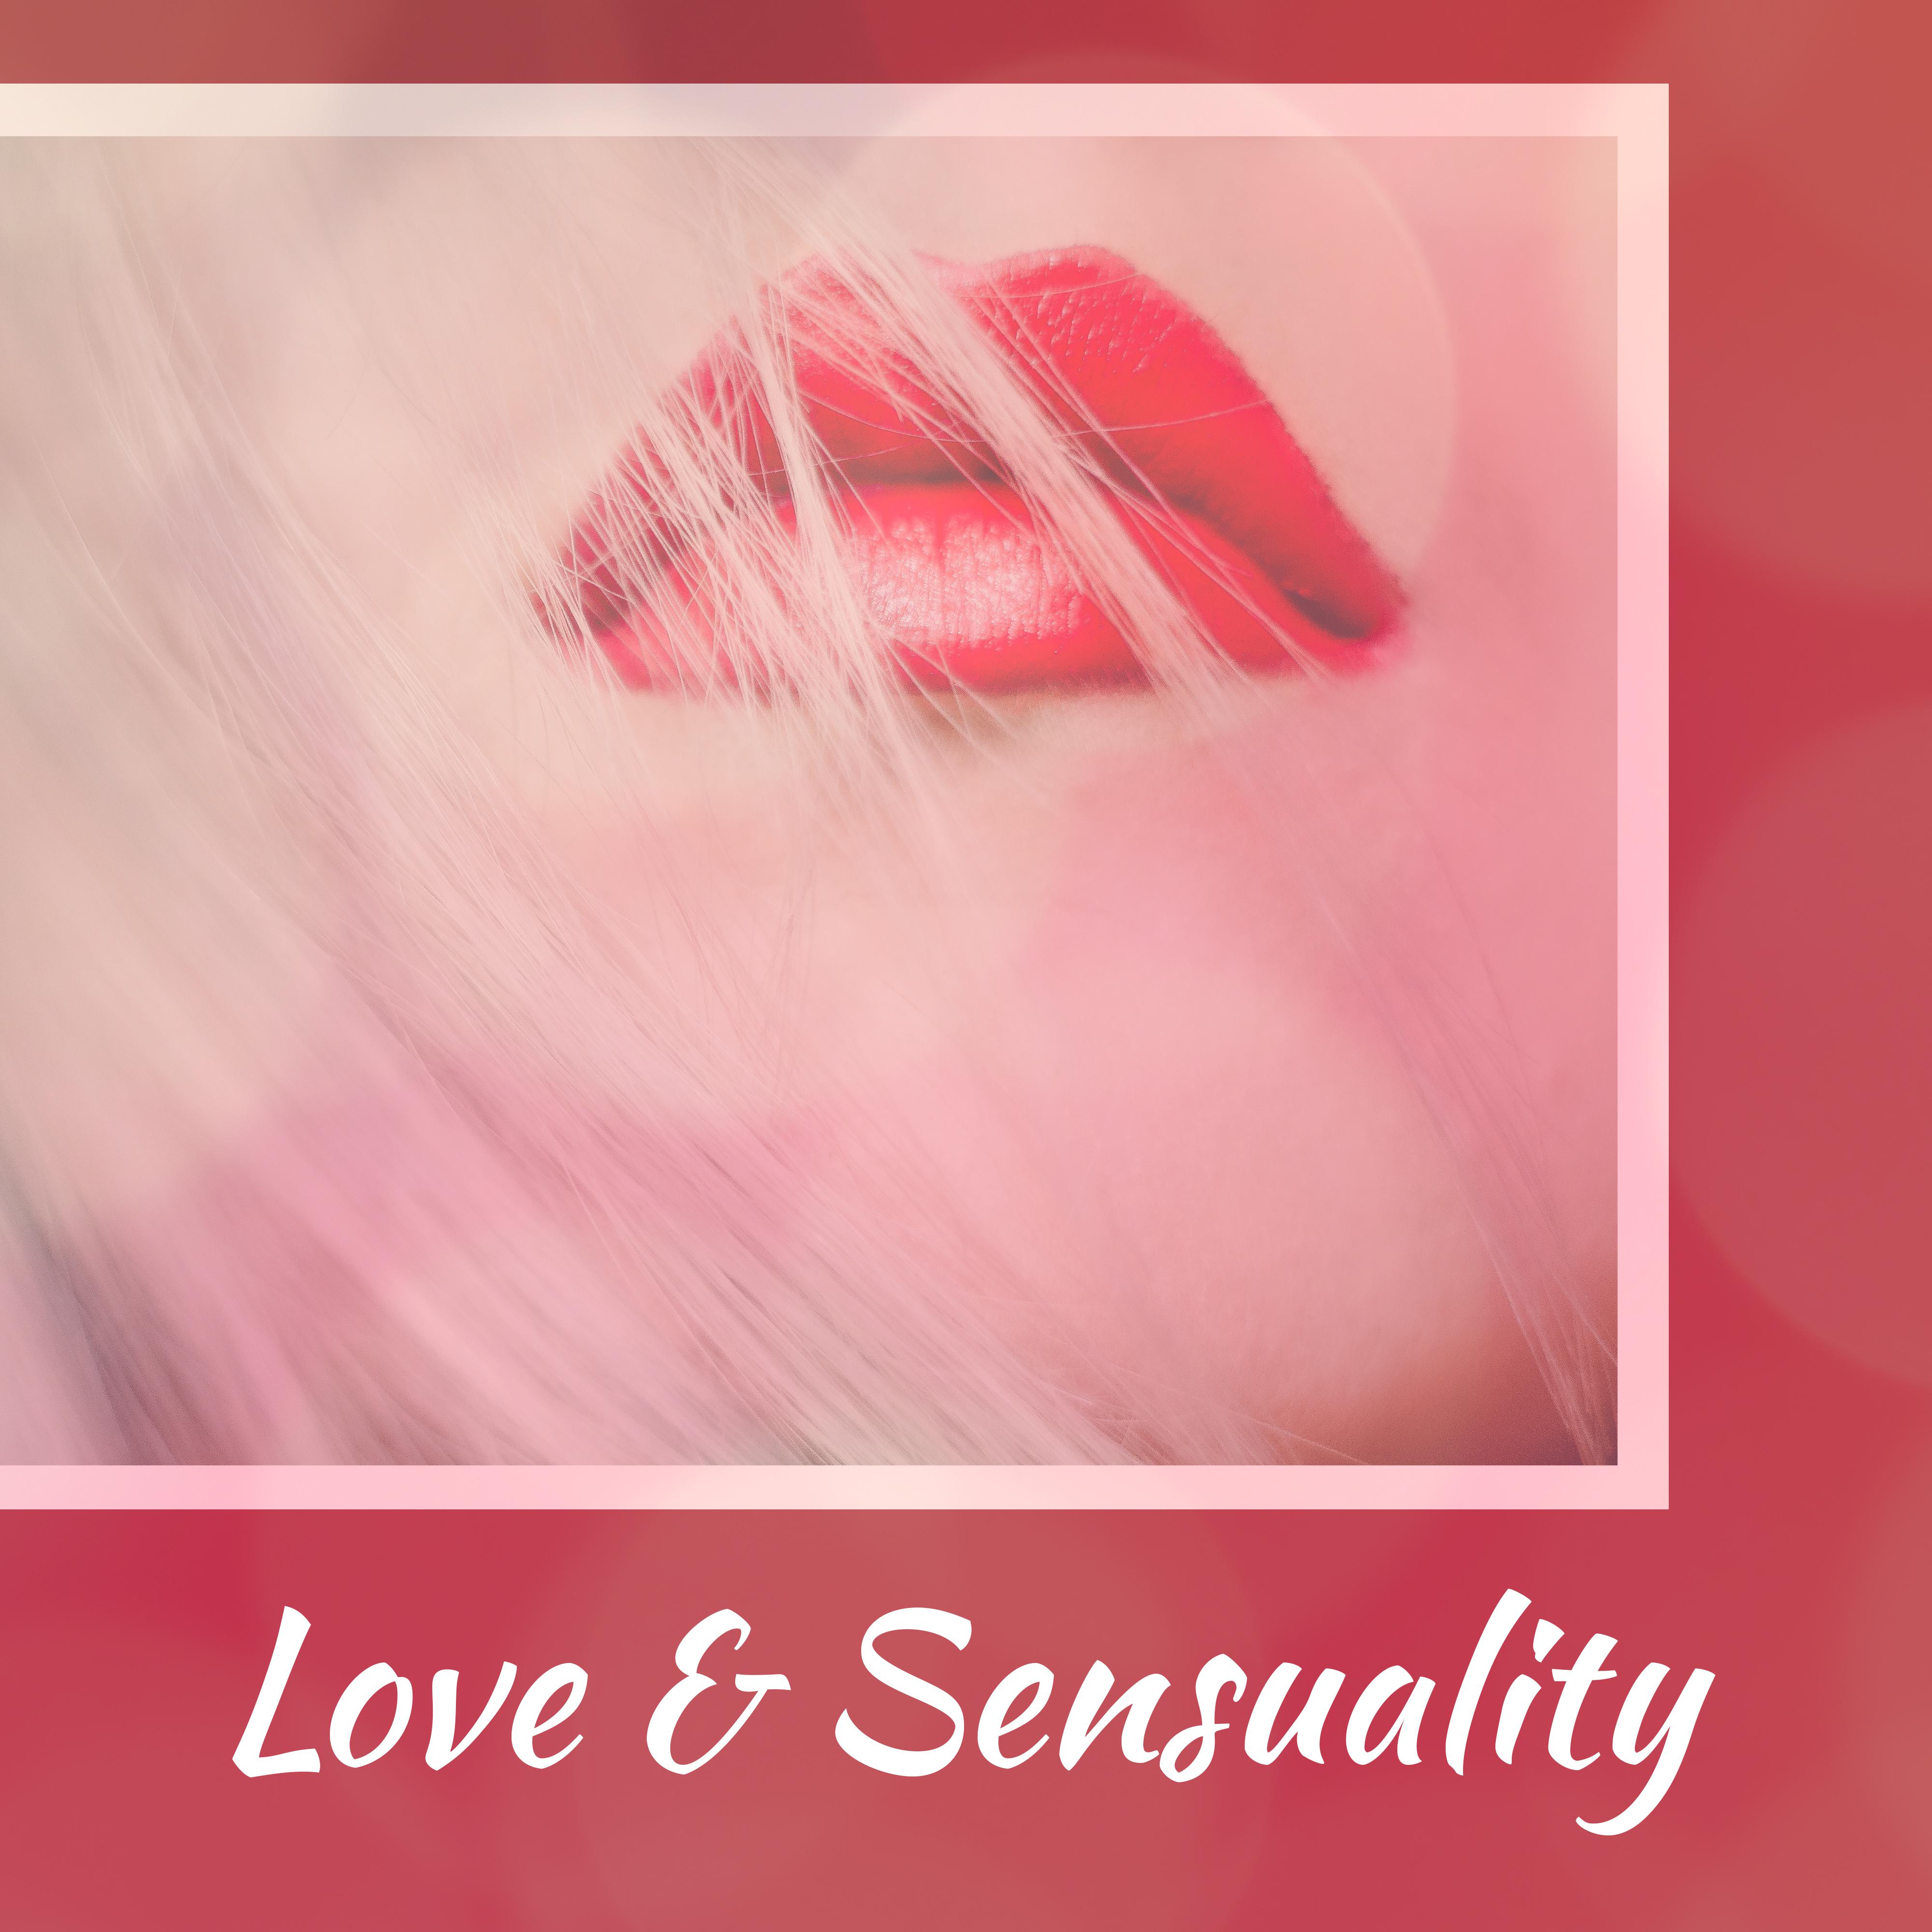 Love & Sensuality – Romantic Jazz for Lovers, Strong Feeling, True Love, Best Smooth Jazz at Night, Romantic Evening